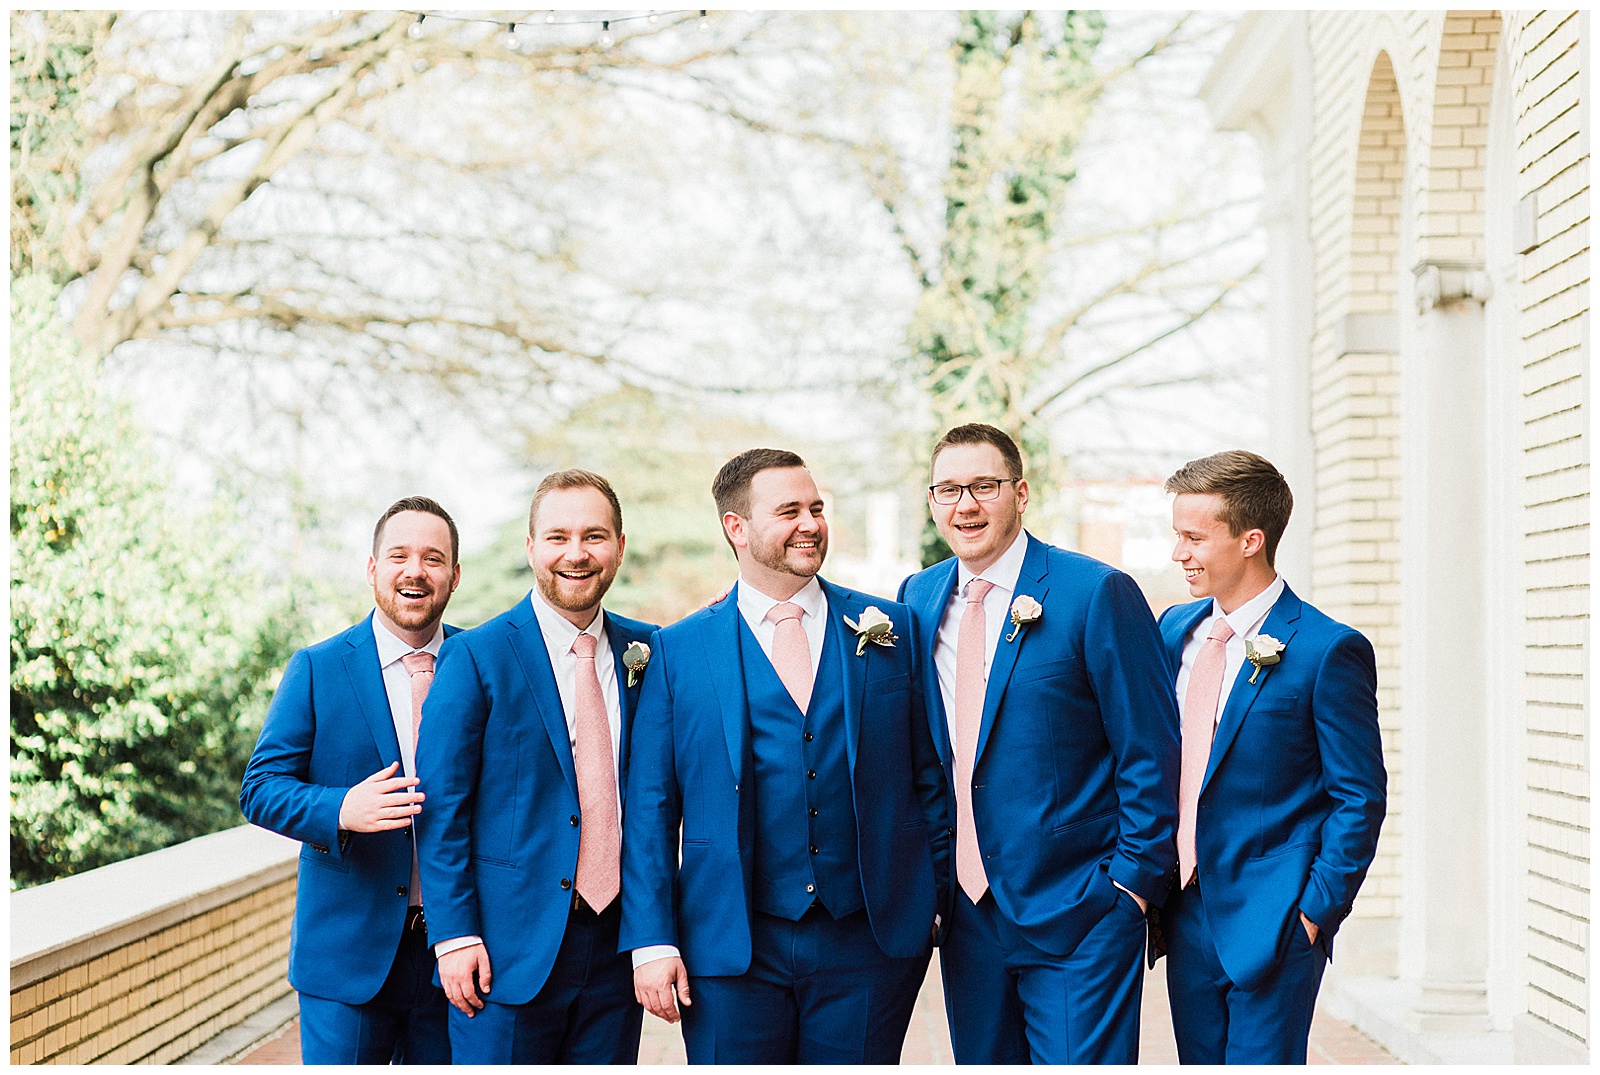 Sharp-Looking Groomsmen Navy Blue Pink Tie Outfit Ideas from Light and Airy Outdoor Wedding at Separk Mansion in Gastonia, NC | Kevyn Dixon Photography